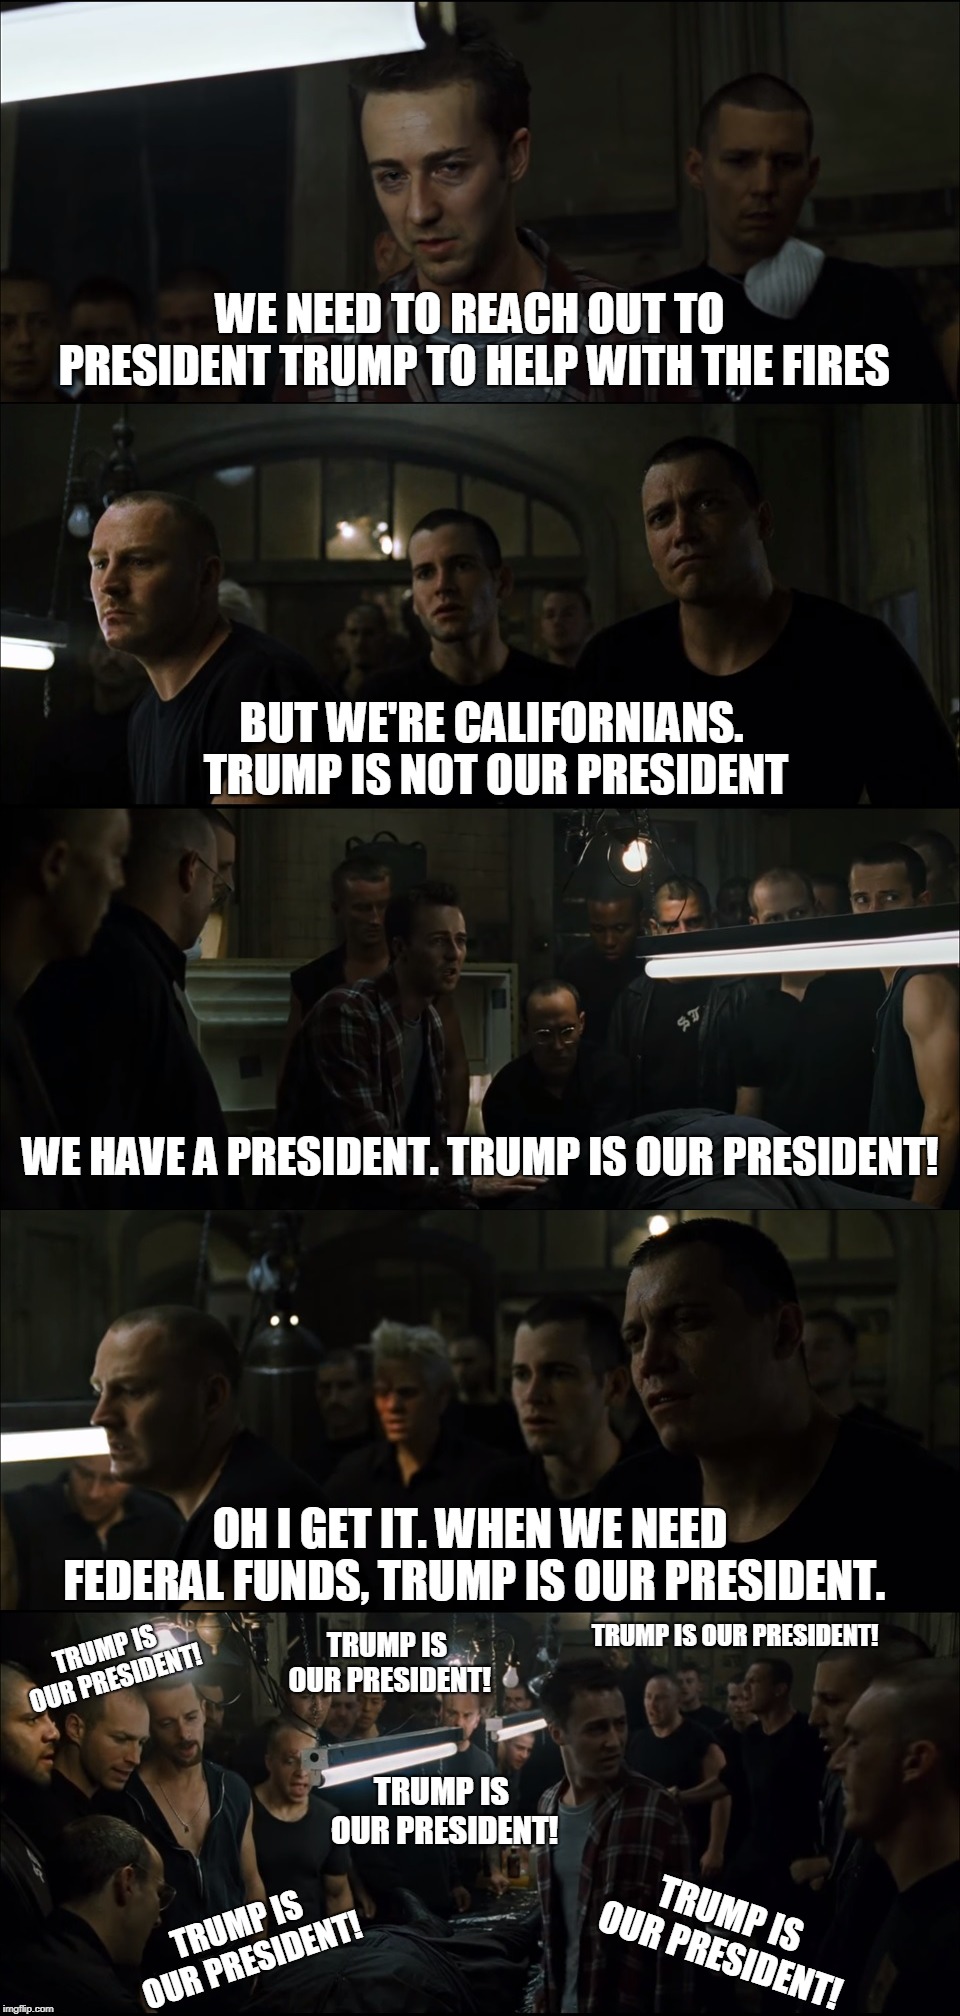 Californians coming to the realization that Trump IS the President. | WE NEED TO REACH OUT TO PRESIDENT TRUMP TO HELP WITH THE FIRES; BUT WE'RE CALIFORNIANS. TRUMP IS NOT OUR PRESIDENT; WE HAVE A PRESIDENT. TRUMP IS OUR PRESIDENT! OH I GET IT. WHEN WE NEED FEDERAL FUNDS, TRUMP IS OUR PRESIDENT. TRUMP IS OUR PRESIDENT! TRUMP IS OUR PRESIDENT! TRUMP IS OUR PRESIDENT! TRUMP IS OUR PRESIDENT! TRUMP IS OUR PRESIDENT! TRUMP IS OUR PRESIDENT! | image tagged in california,fight club,president trump,political meme,original meme | made w/ Imgflip meme maker